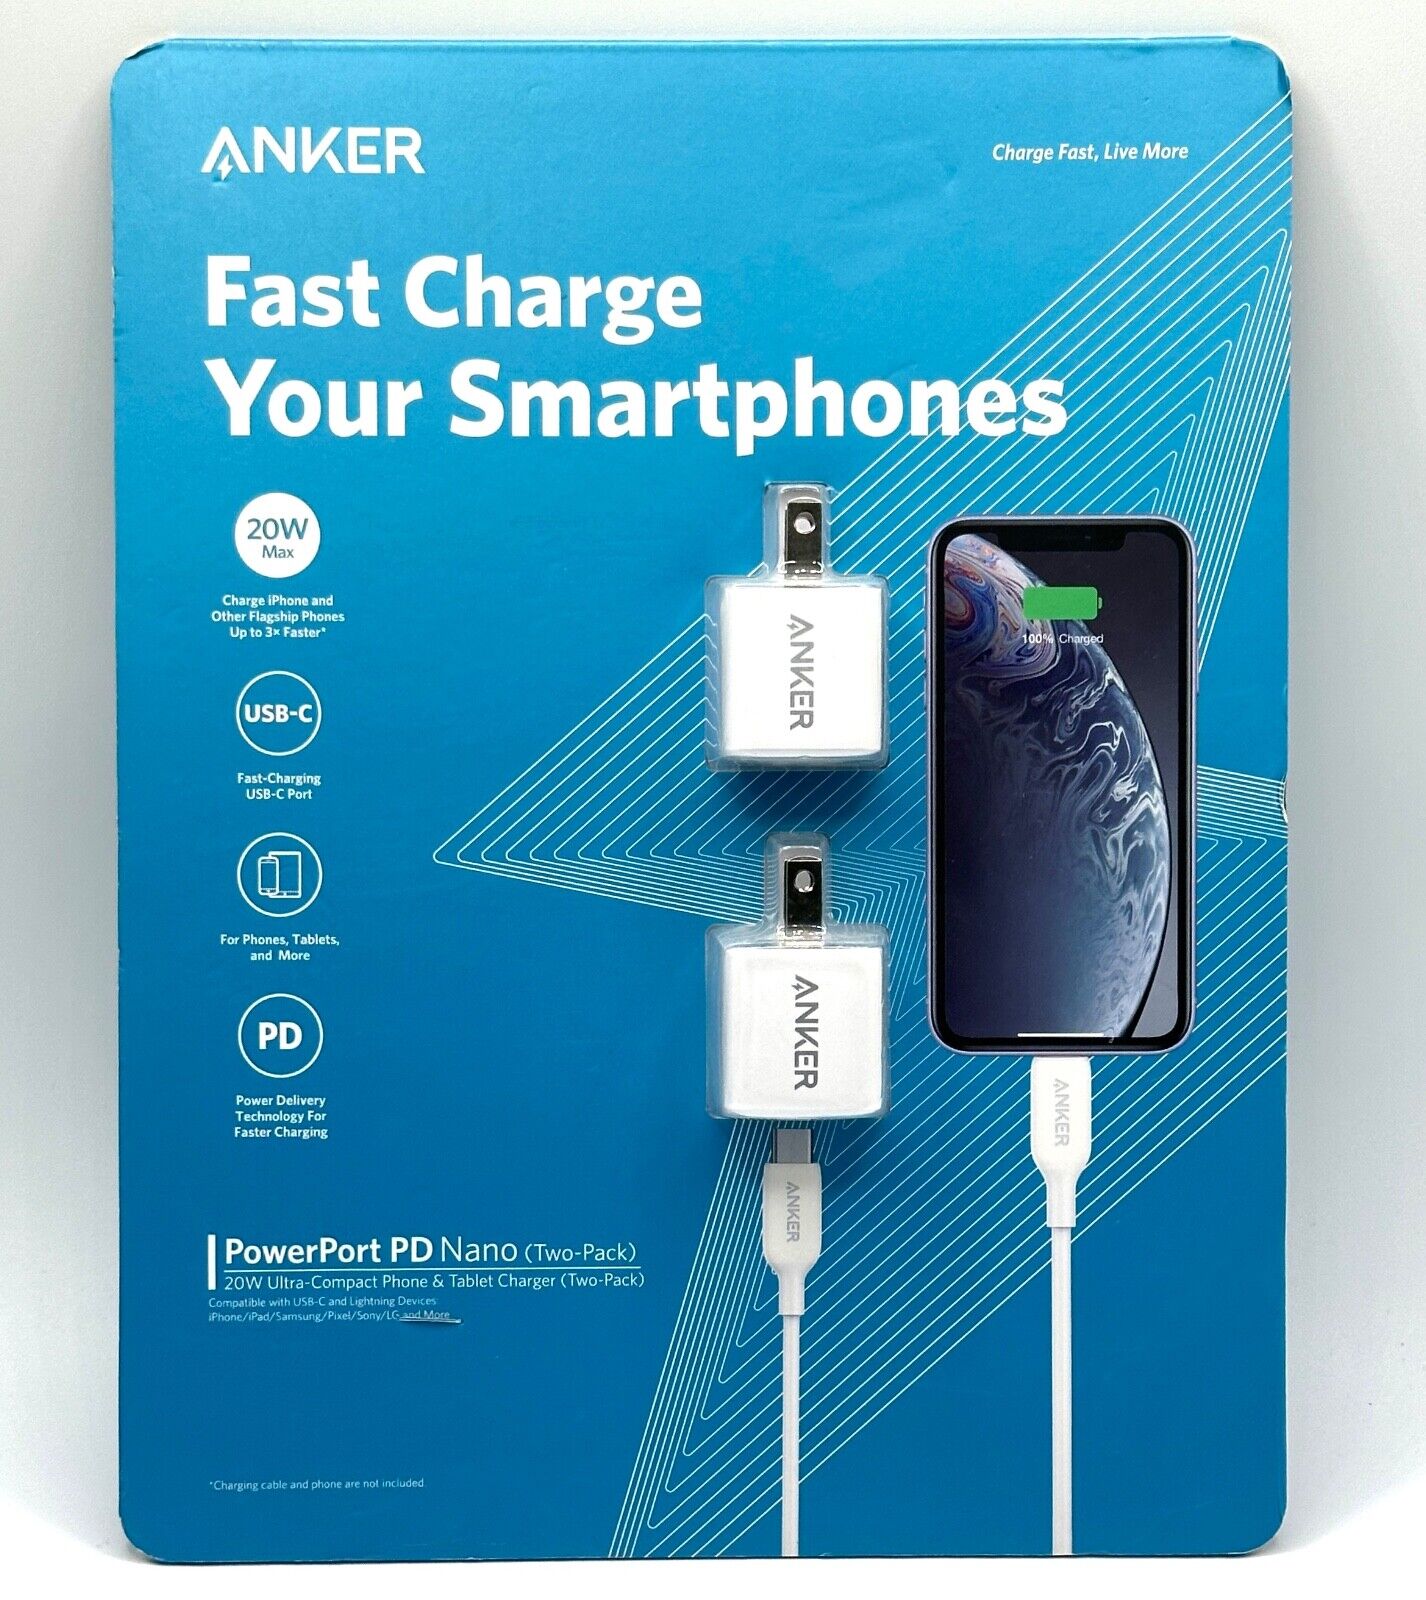 2 PACK) (NEW) Anker Nano 20W PD USB-C Wall Charger